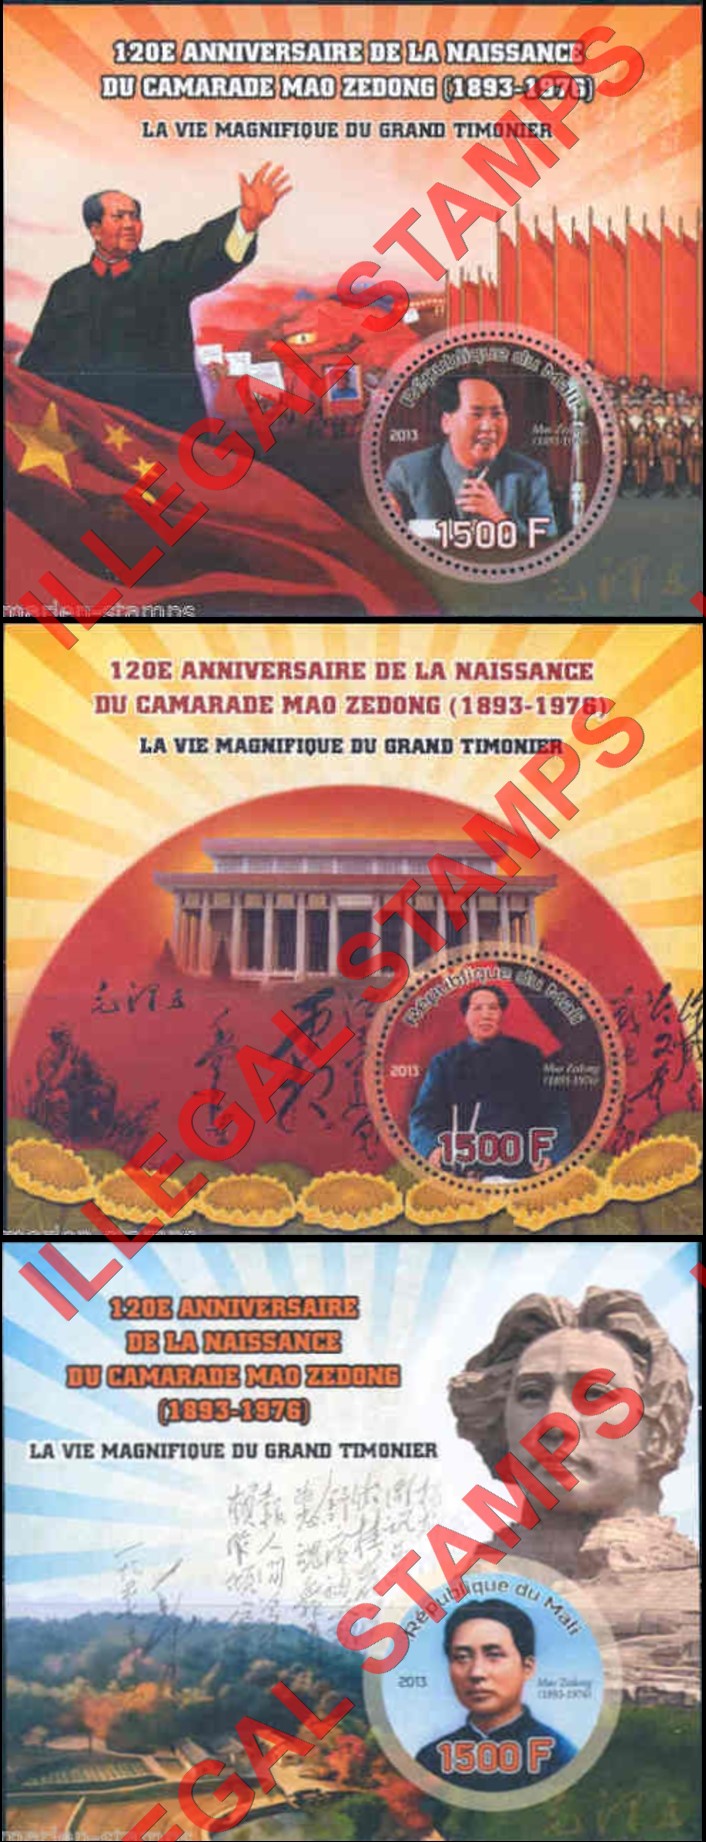 Mali 2013 Mao Zedong Illegal Stamp Souvenir Sheets of 1